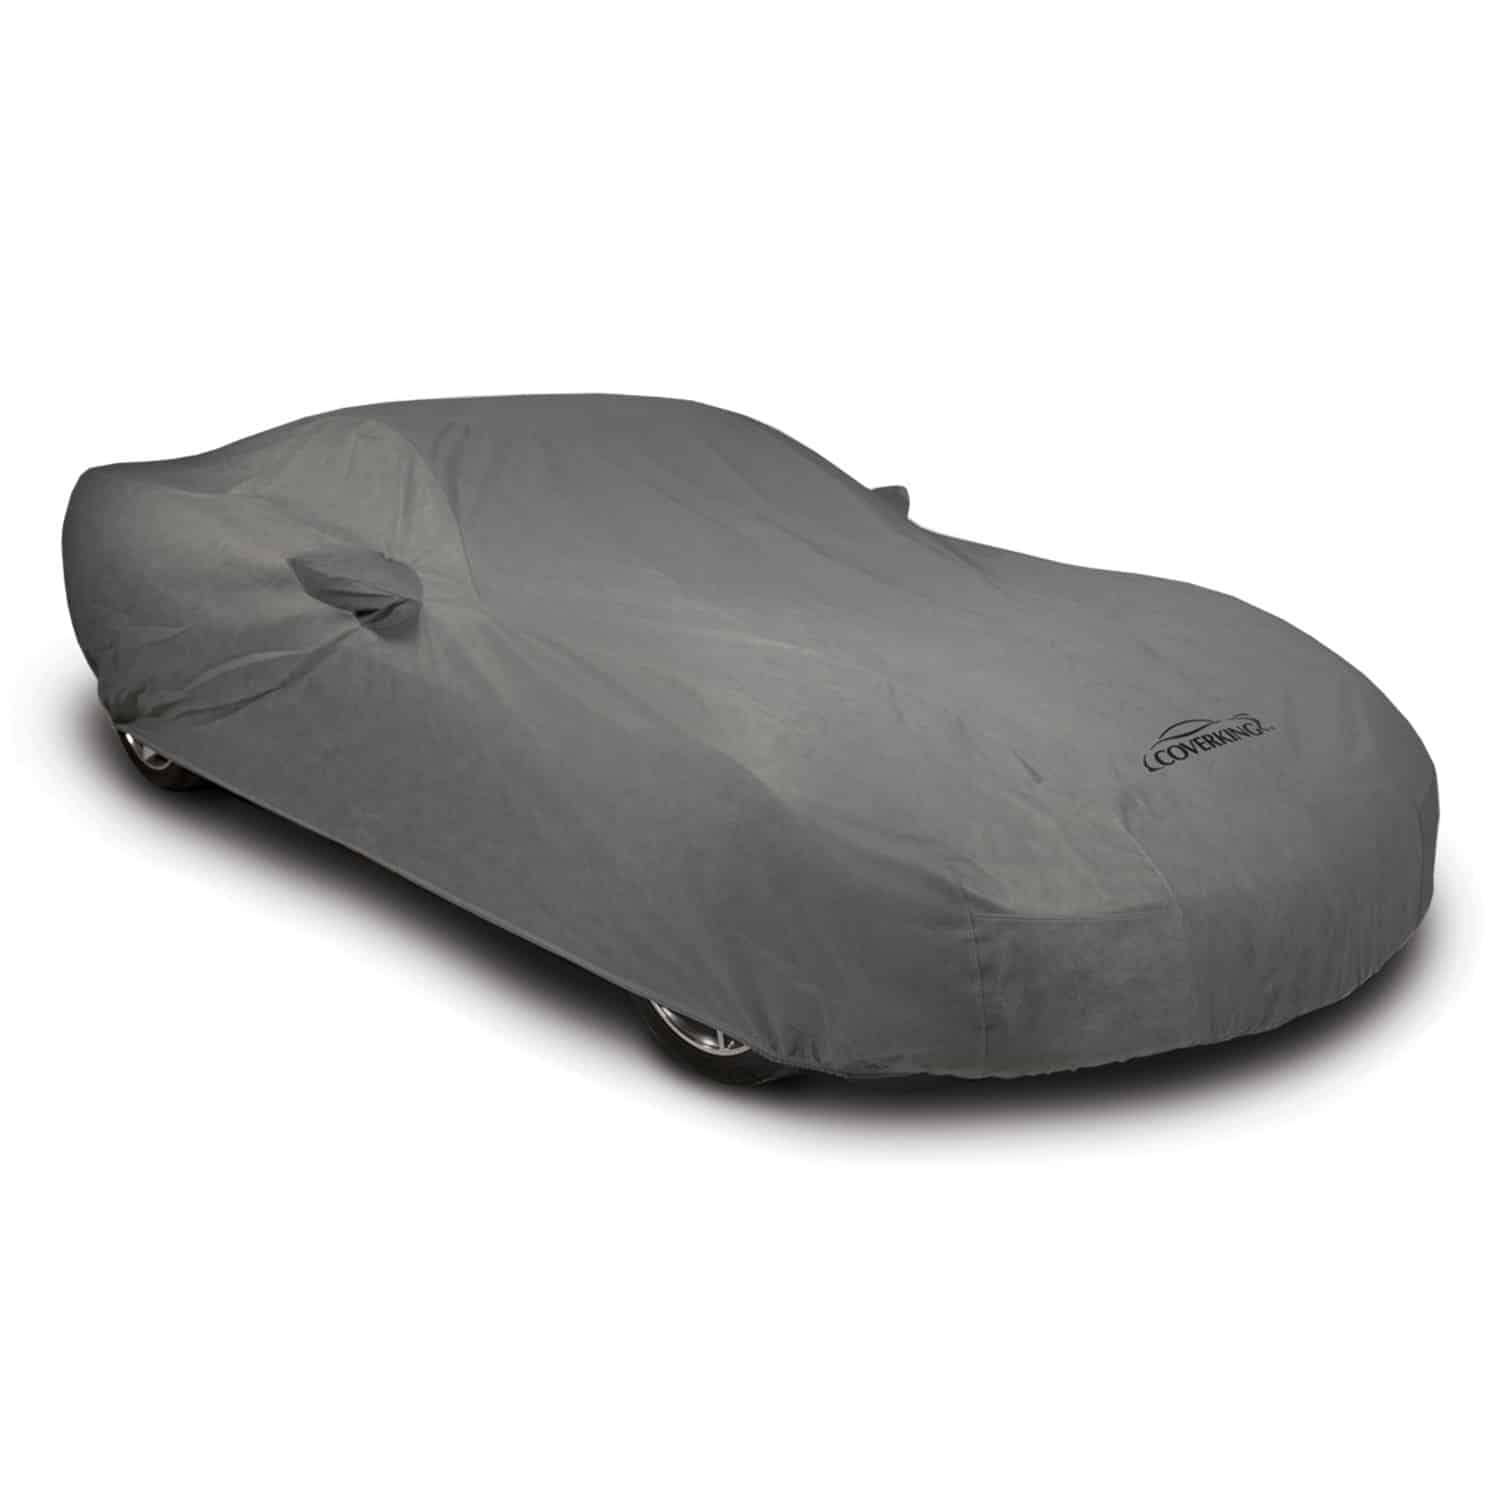 Saturn Sky CoverKing Coverbond Outdoor Car Cover